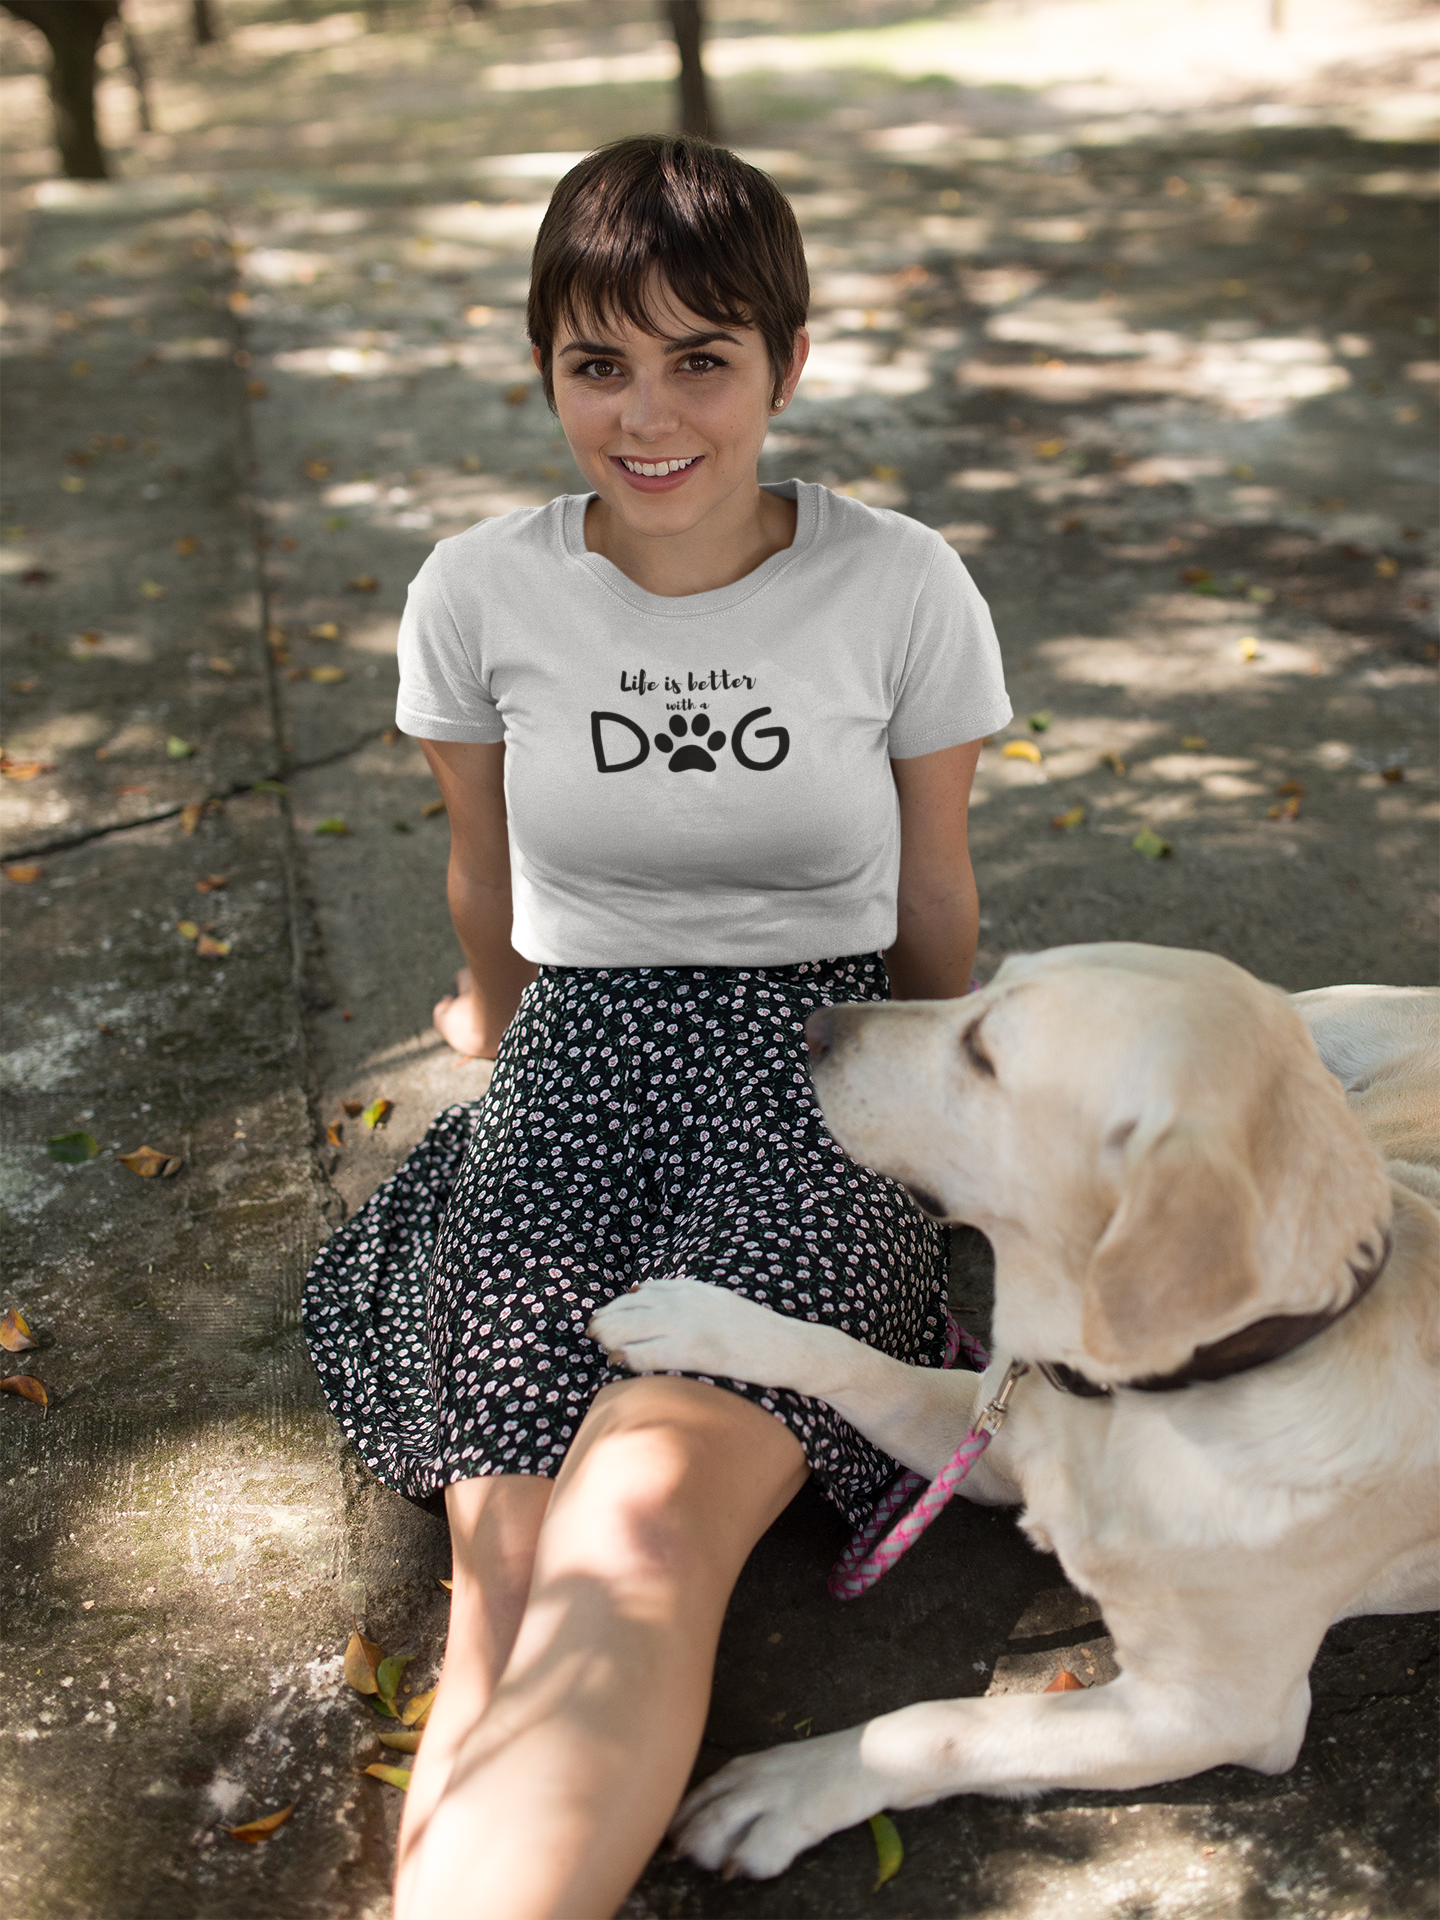 Life is better with a dog Custom Graphic Tee